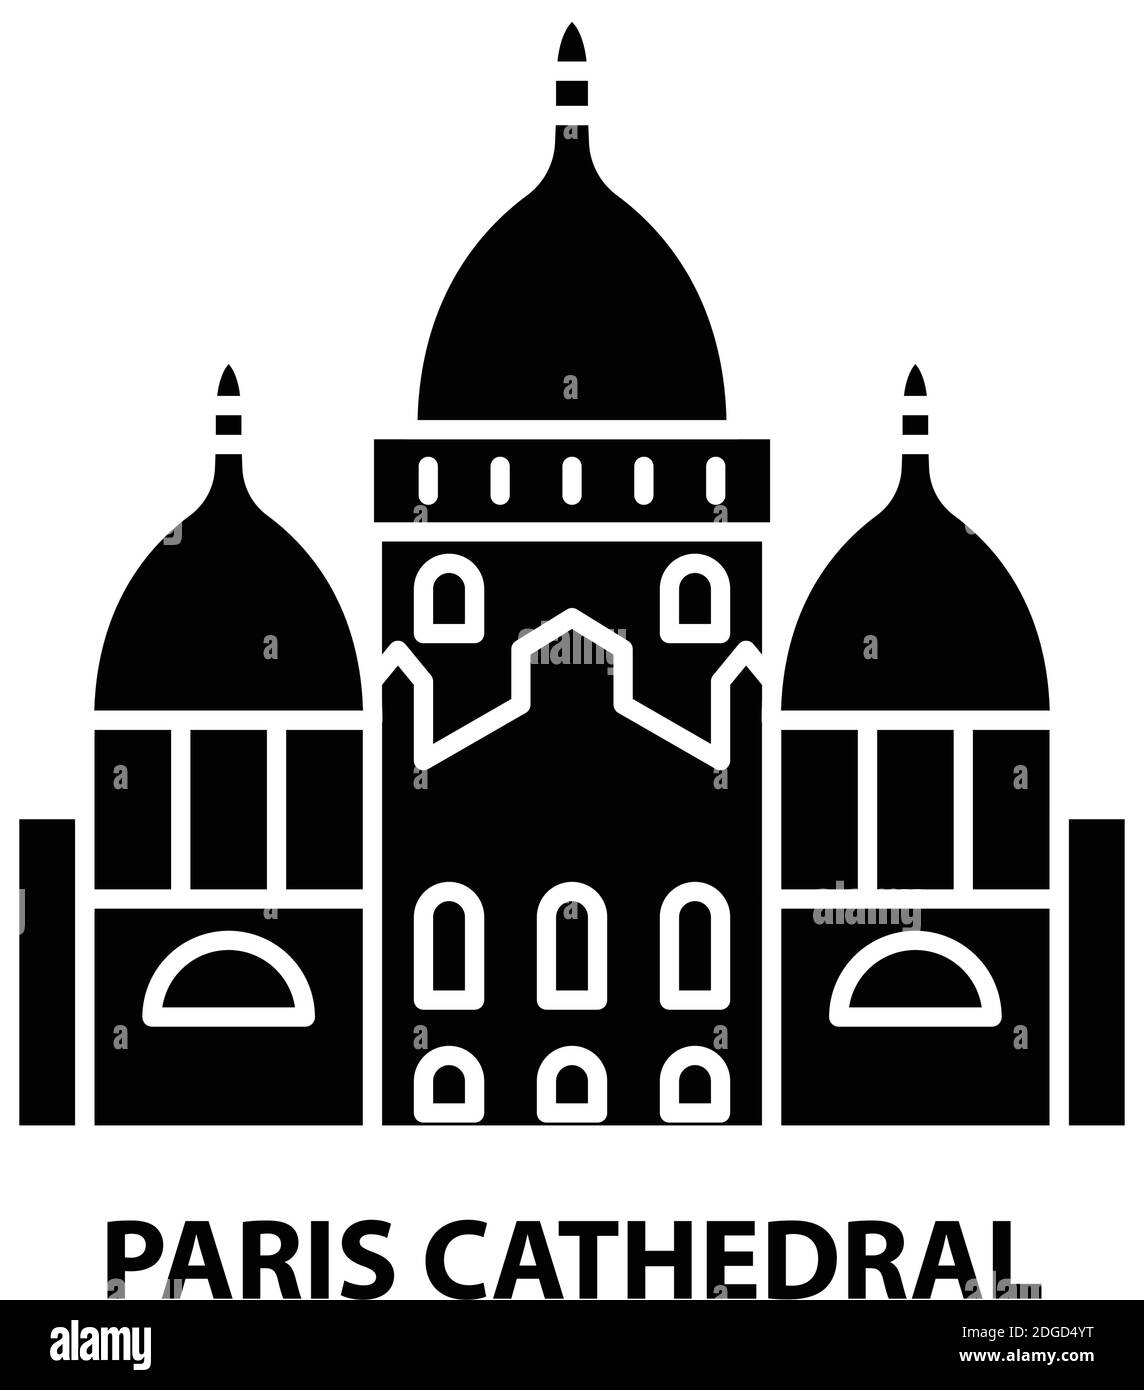 paris cathedral icon, black vector sign with editable strokes, concept illustration Stock Vector